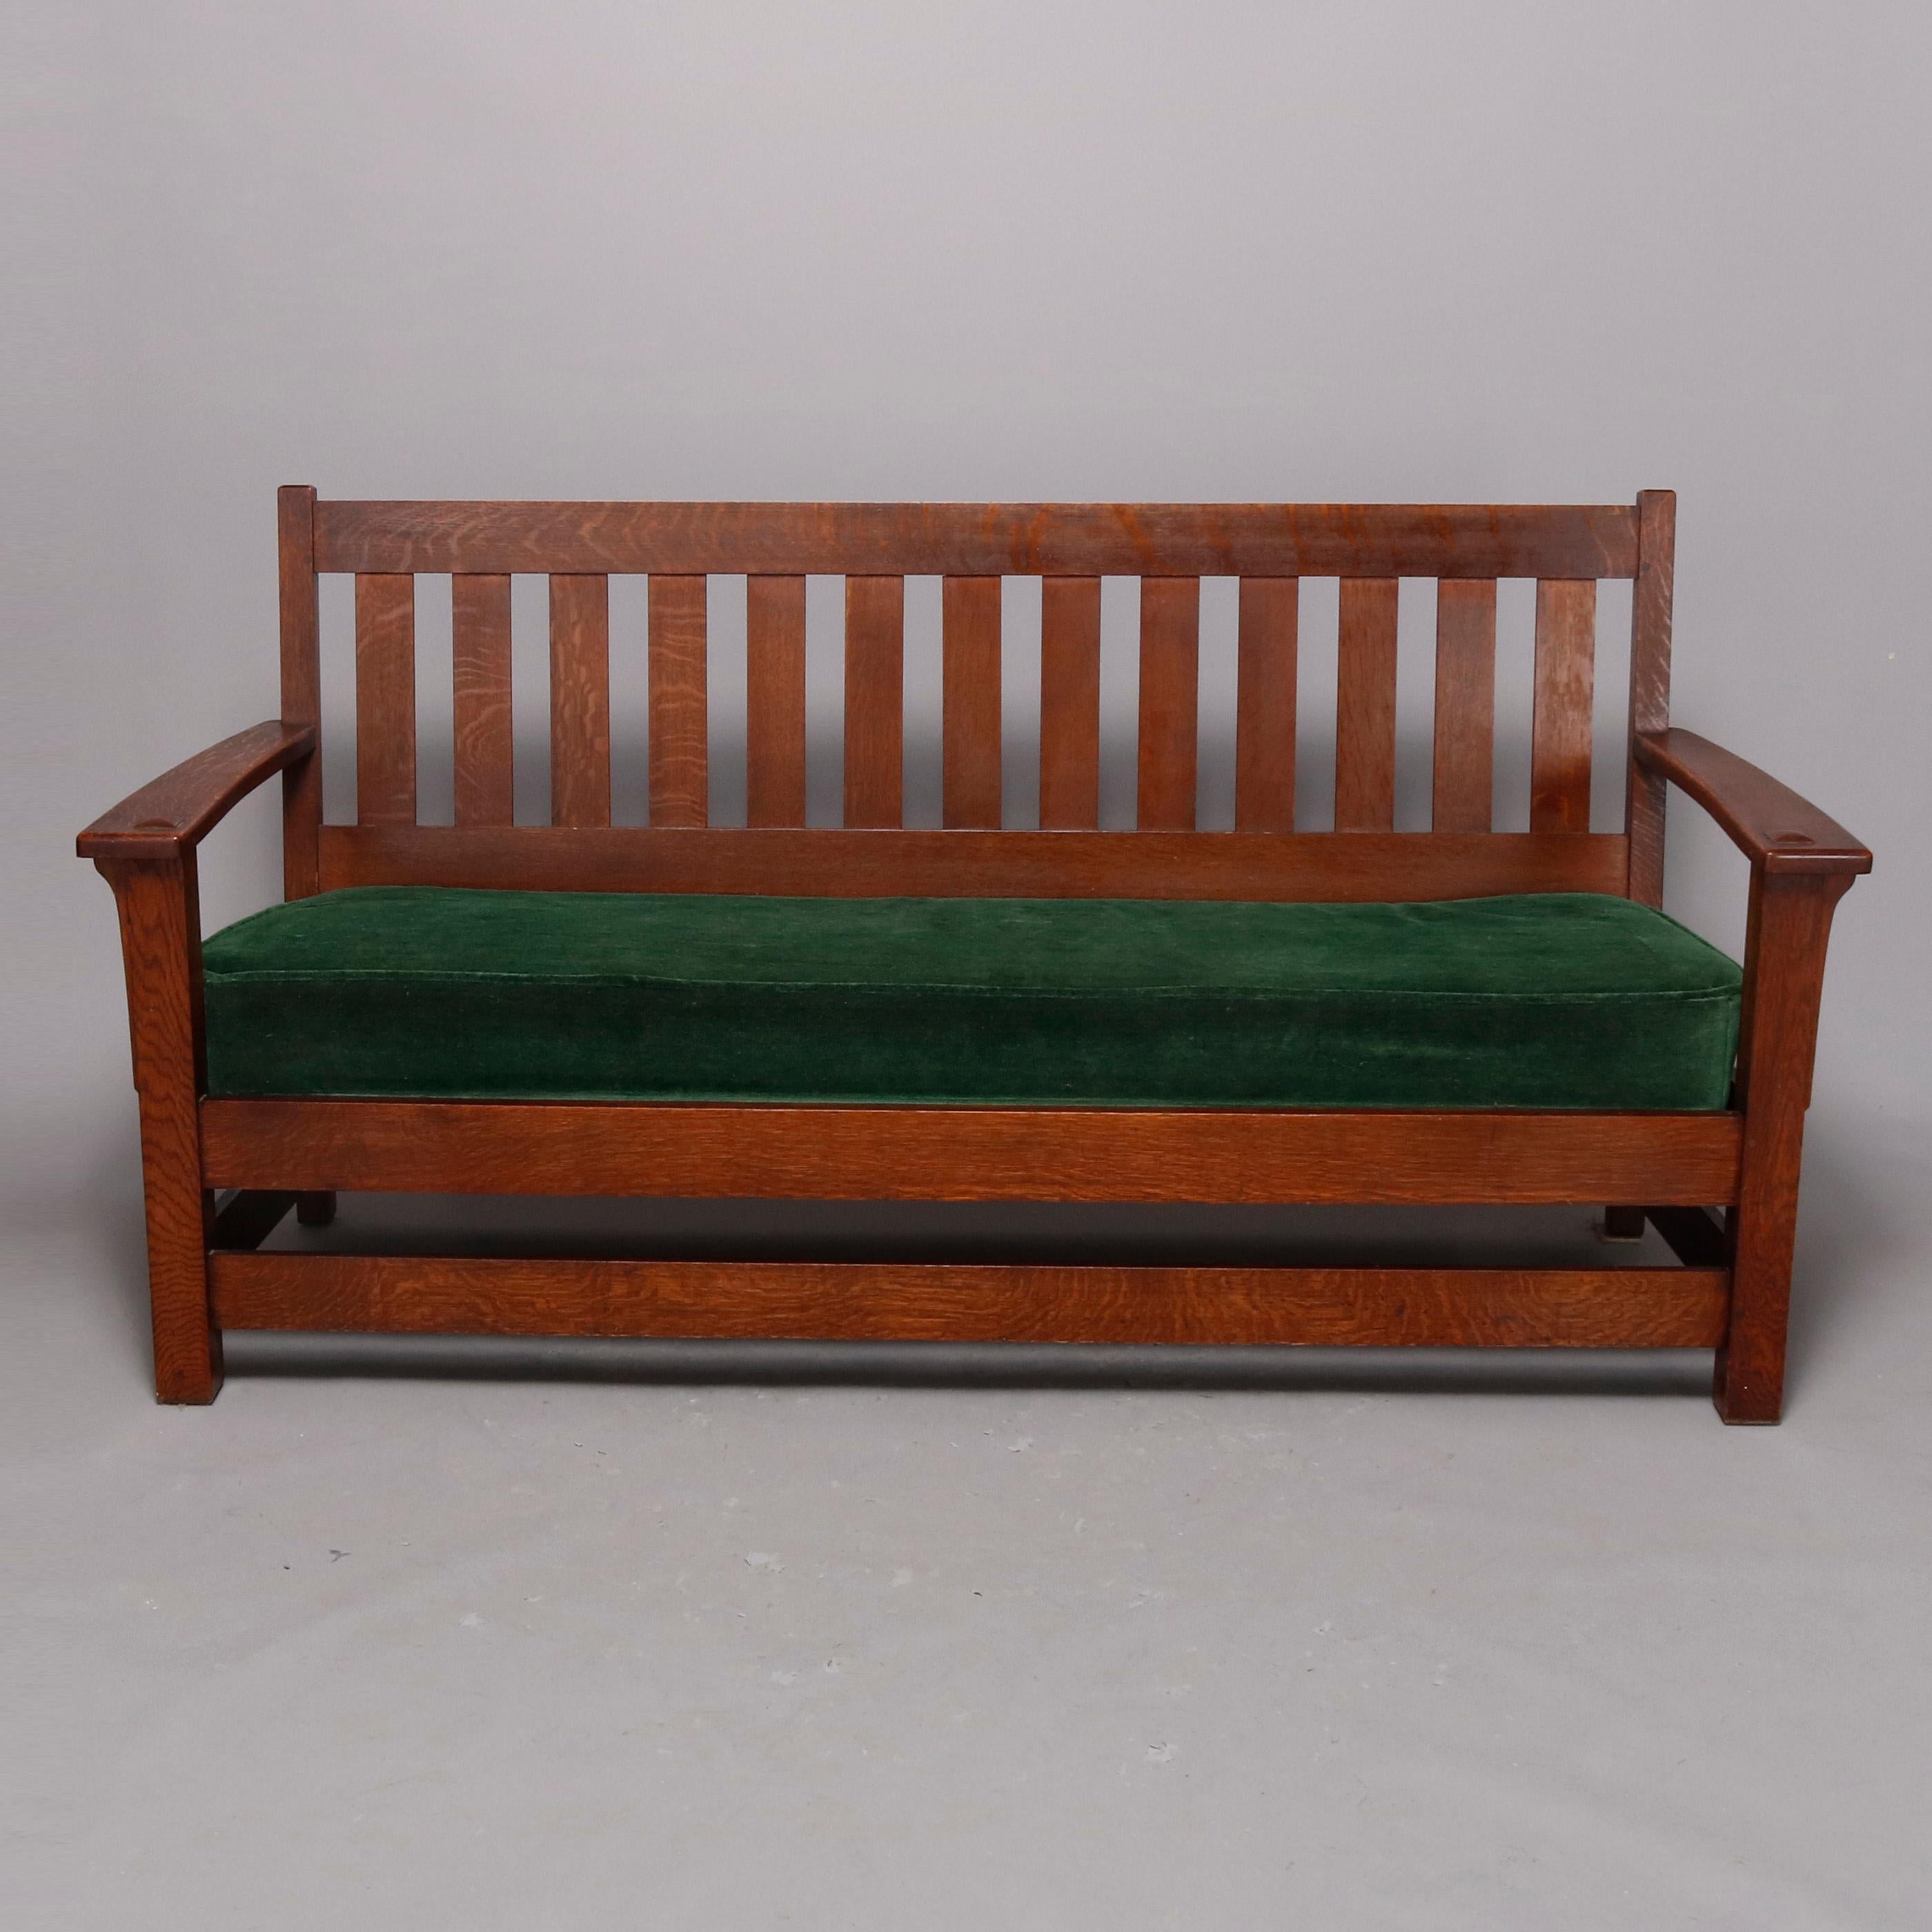 An Arts & Crafts mission oak settee by Limbert offers quarter sawn oak construction with slat back having double cushion surmounting cushioned seat flanked by open and mortised arms, brand stamp as photographed, circa 1910

Measures: 37